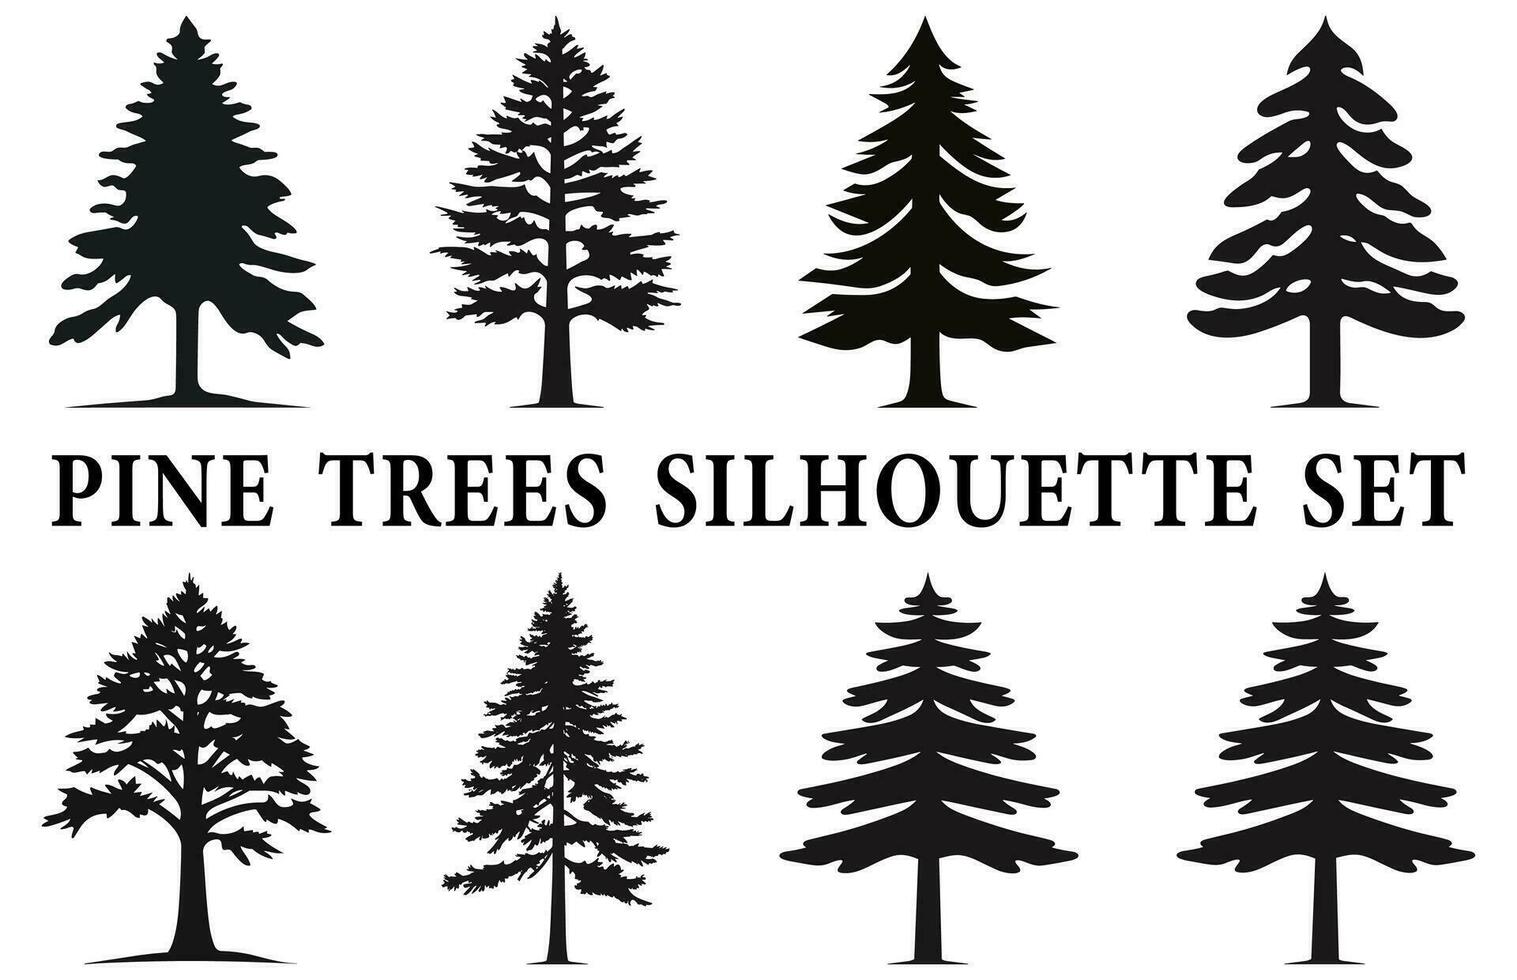 Free Pine Tree silhouettes Clipart bundle, Set of Vintage Pine Tree silhouette vector